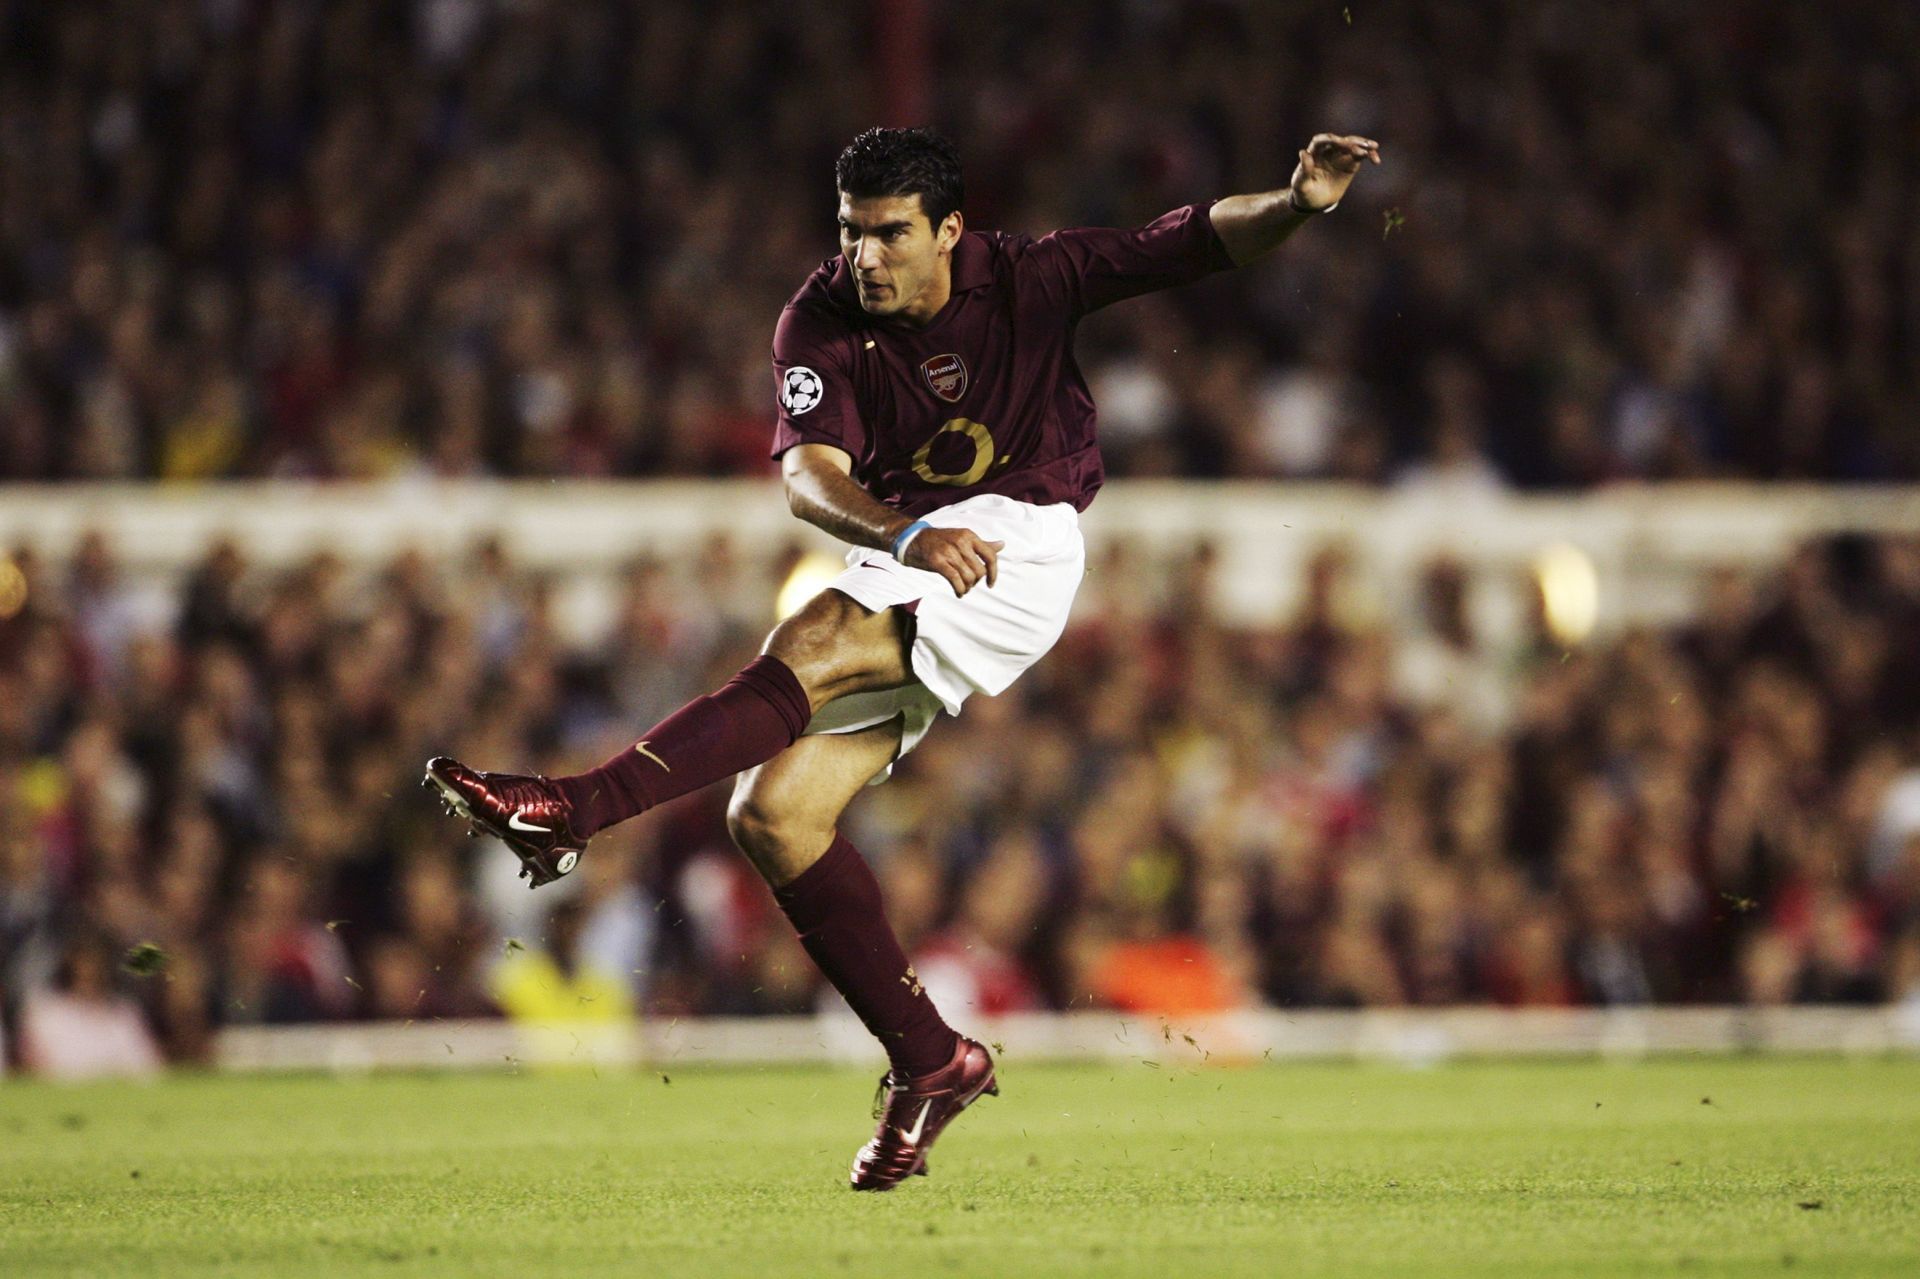 Jose Antonio Reyes was an important player for the Gunenrs